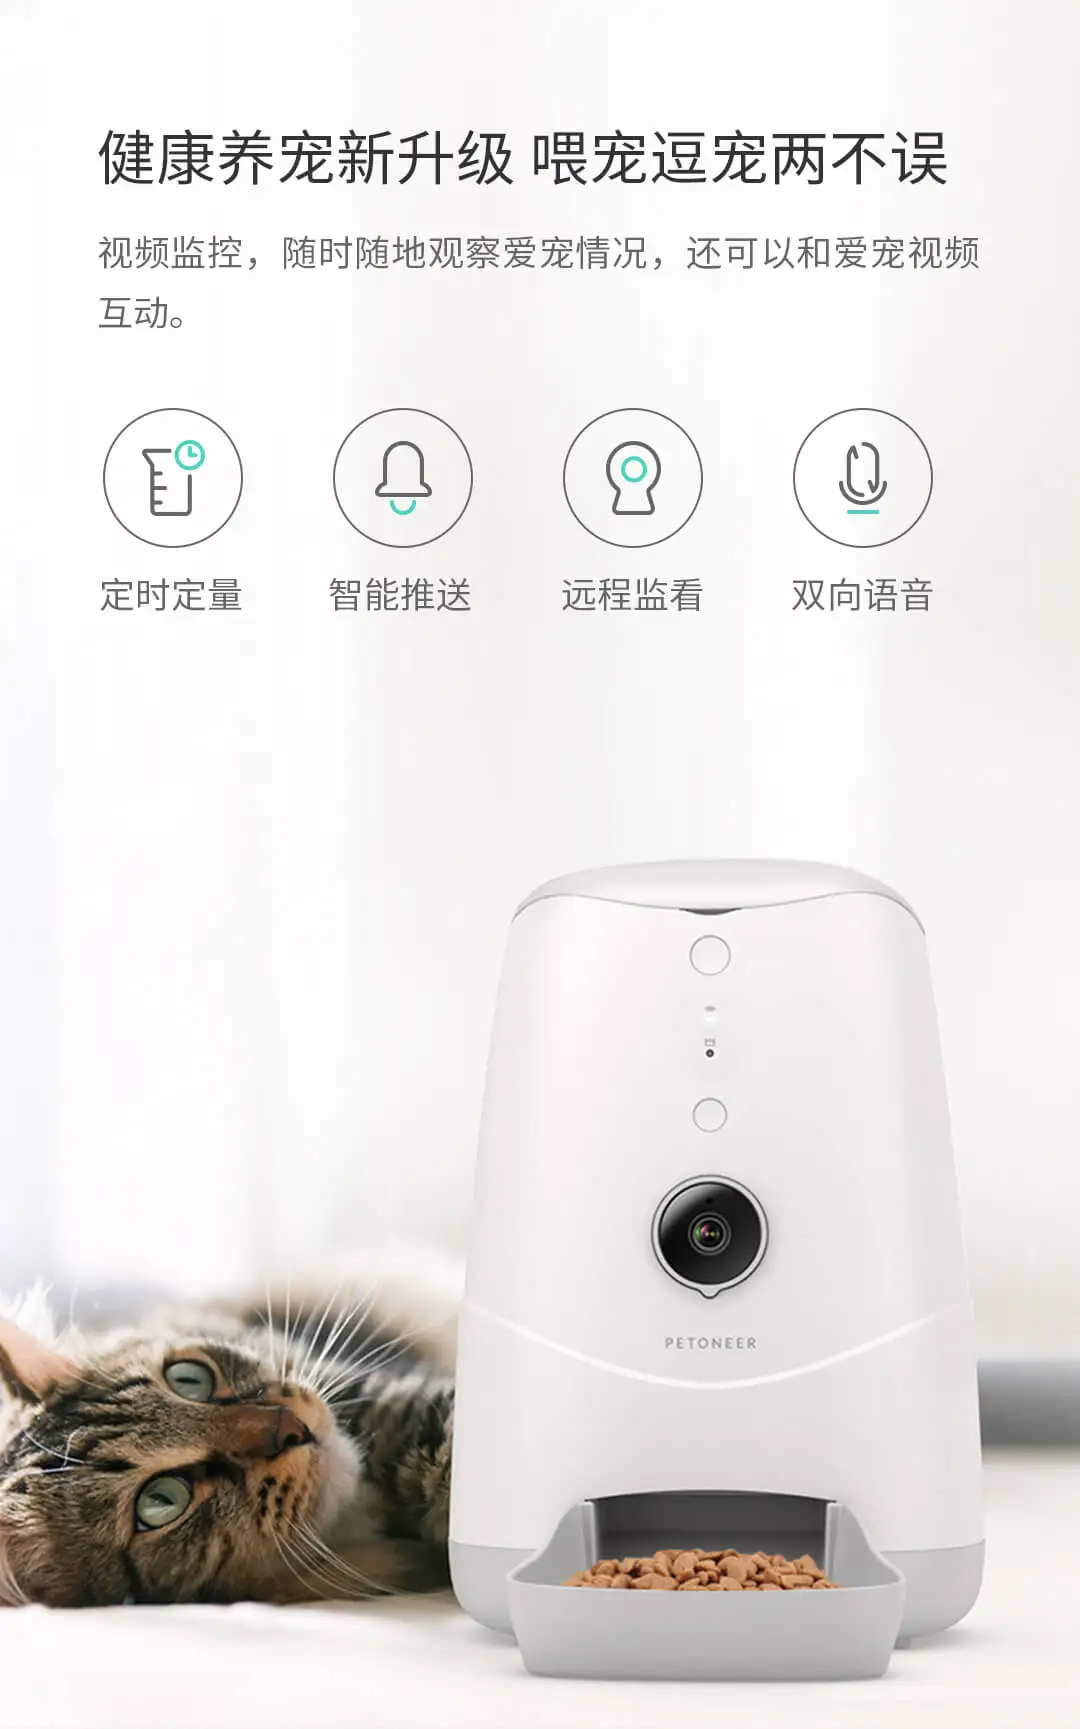 

Xiaomi Petoneer Smart Remote Control Pet Food Feeder HD Night Vision Camera With Microphone Video Monitoring Mijia App Control